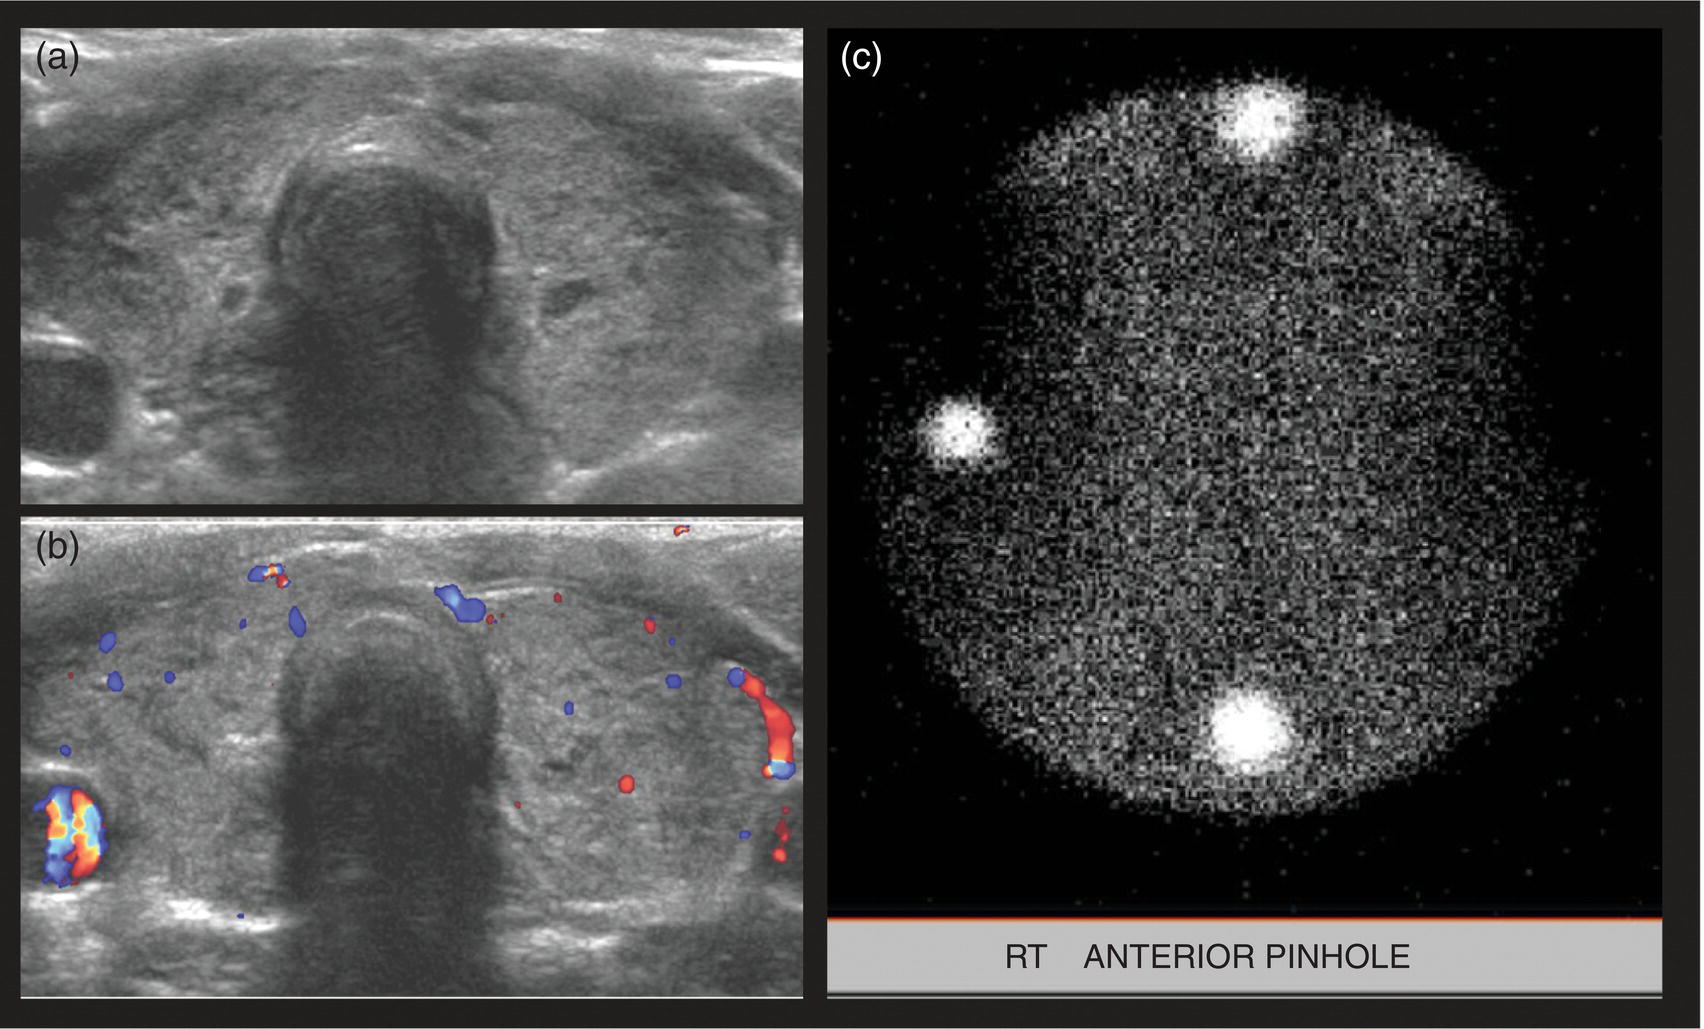 Schematic illustration of (a) 14-year-old female with Hashimoto's thyroiditis. (b) Color Doppler transverse US image shows decreased vascularity. (c) 99mTc scan shows no uptake in the nonfunctioning gland. Markers were placed at the right neck chin and sternal notch.